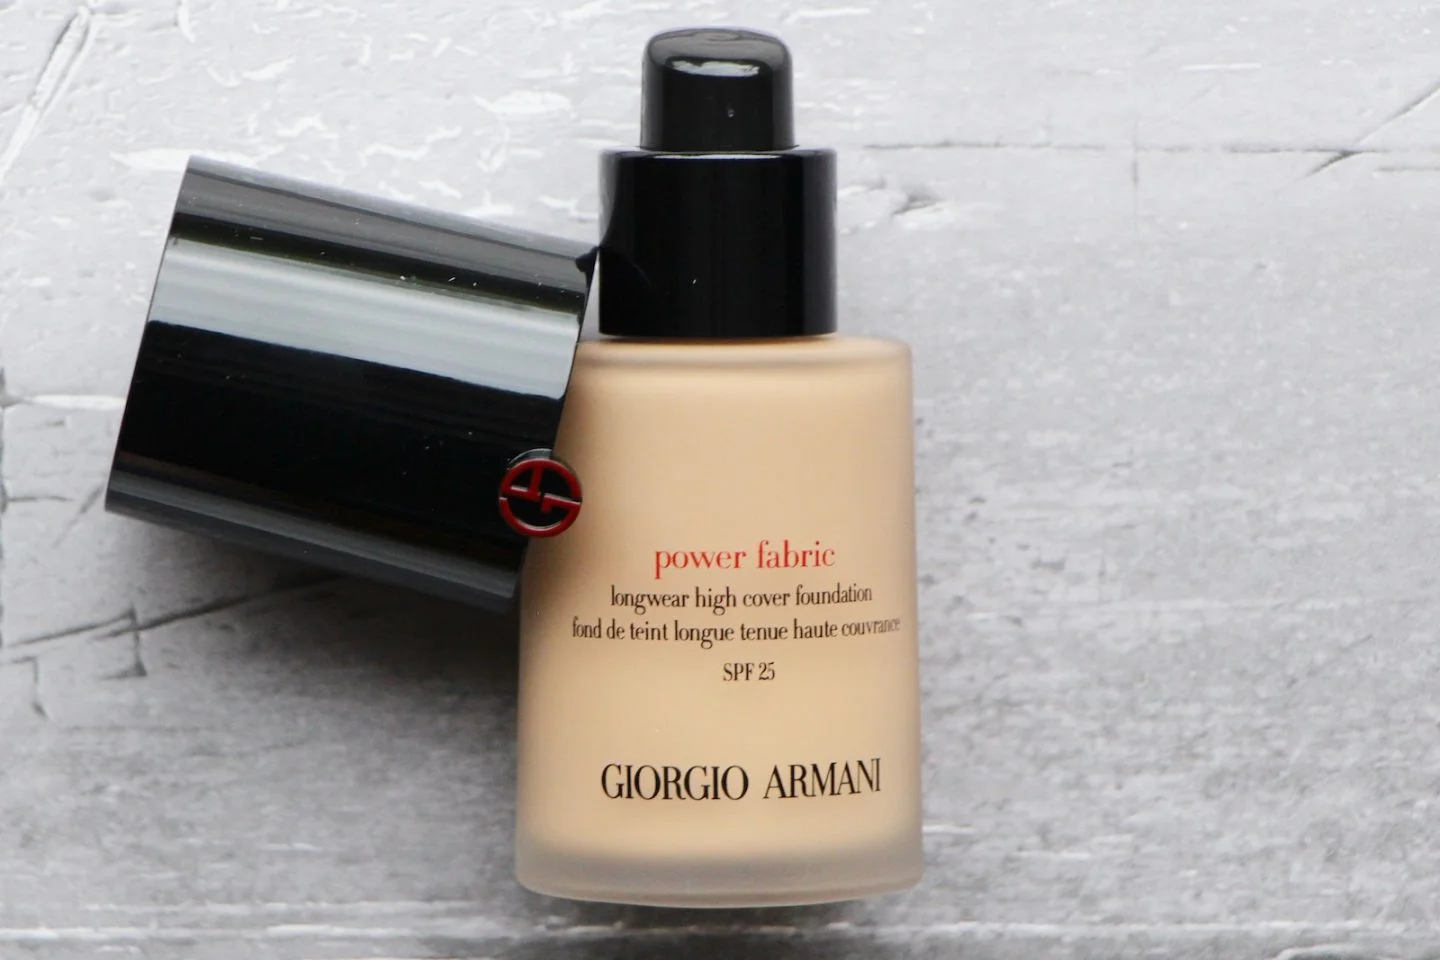 Armani Power Fabric Foundation Review